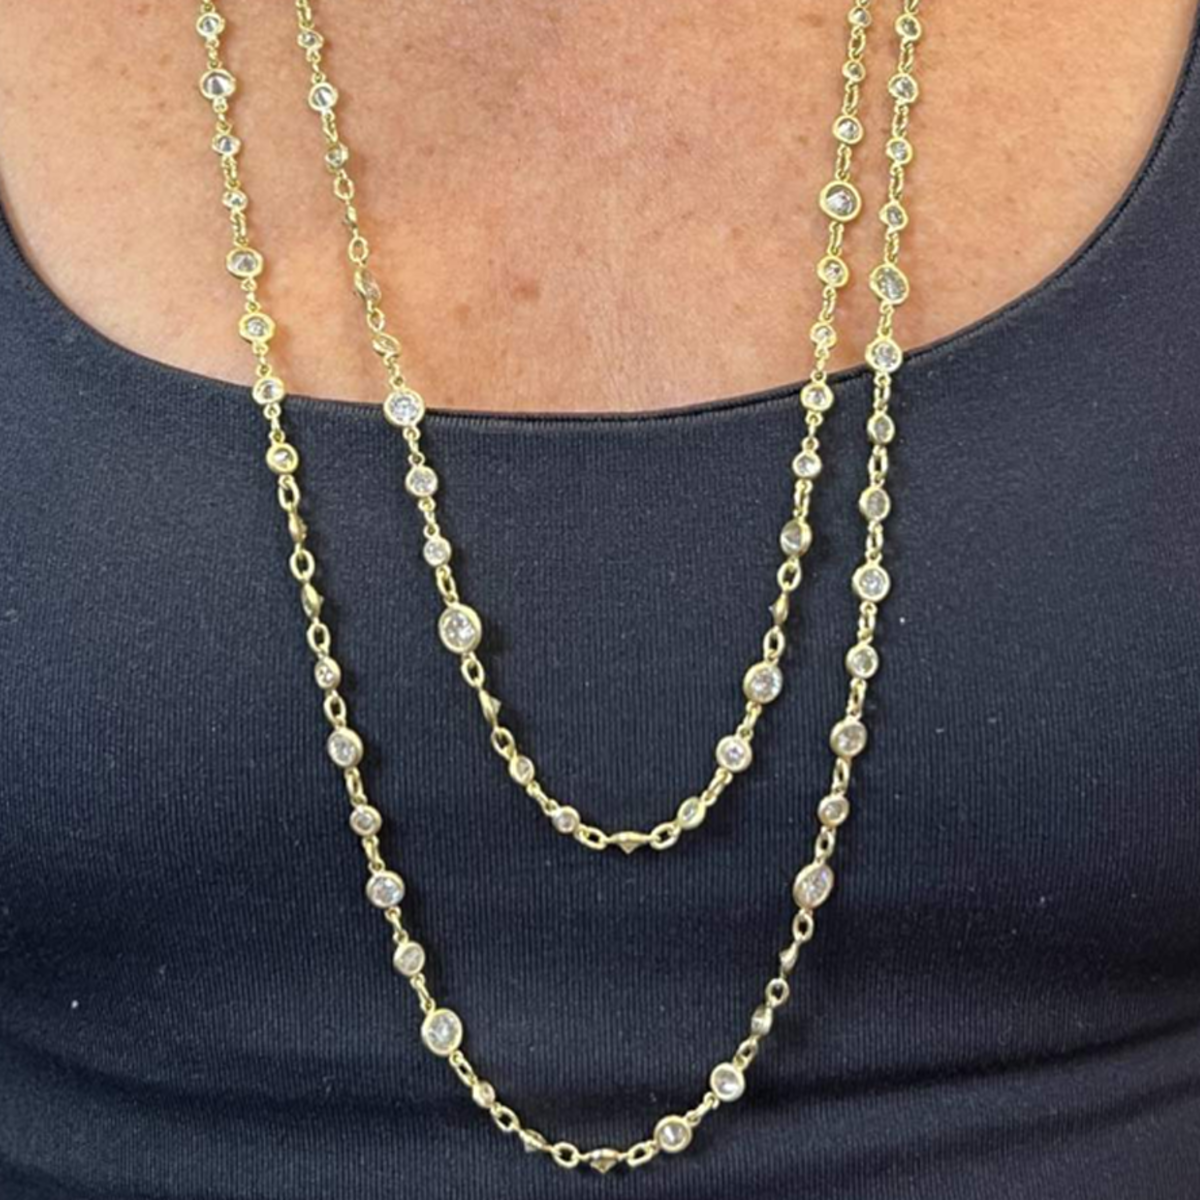 Post-1980s 18KT Yellow Gold Diamond Necklace worn on neck